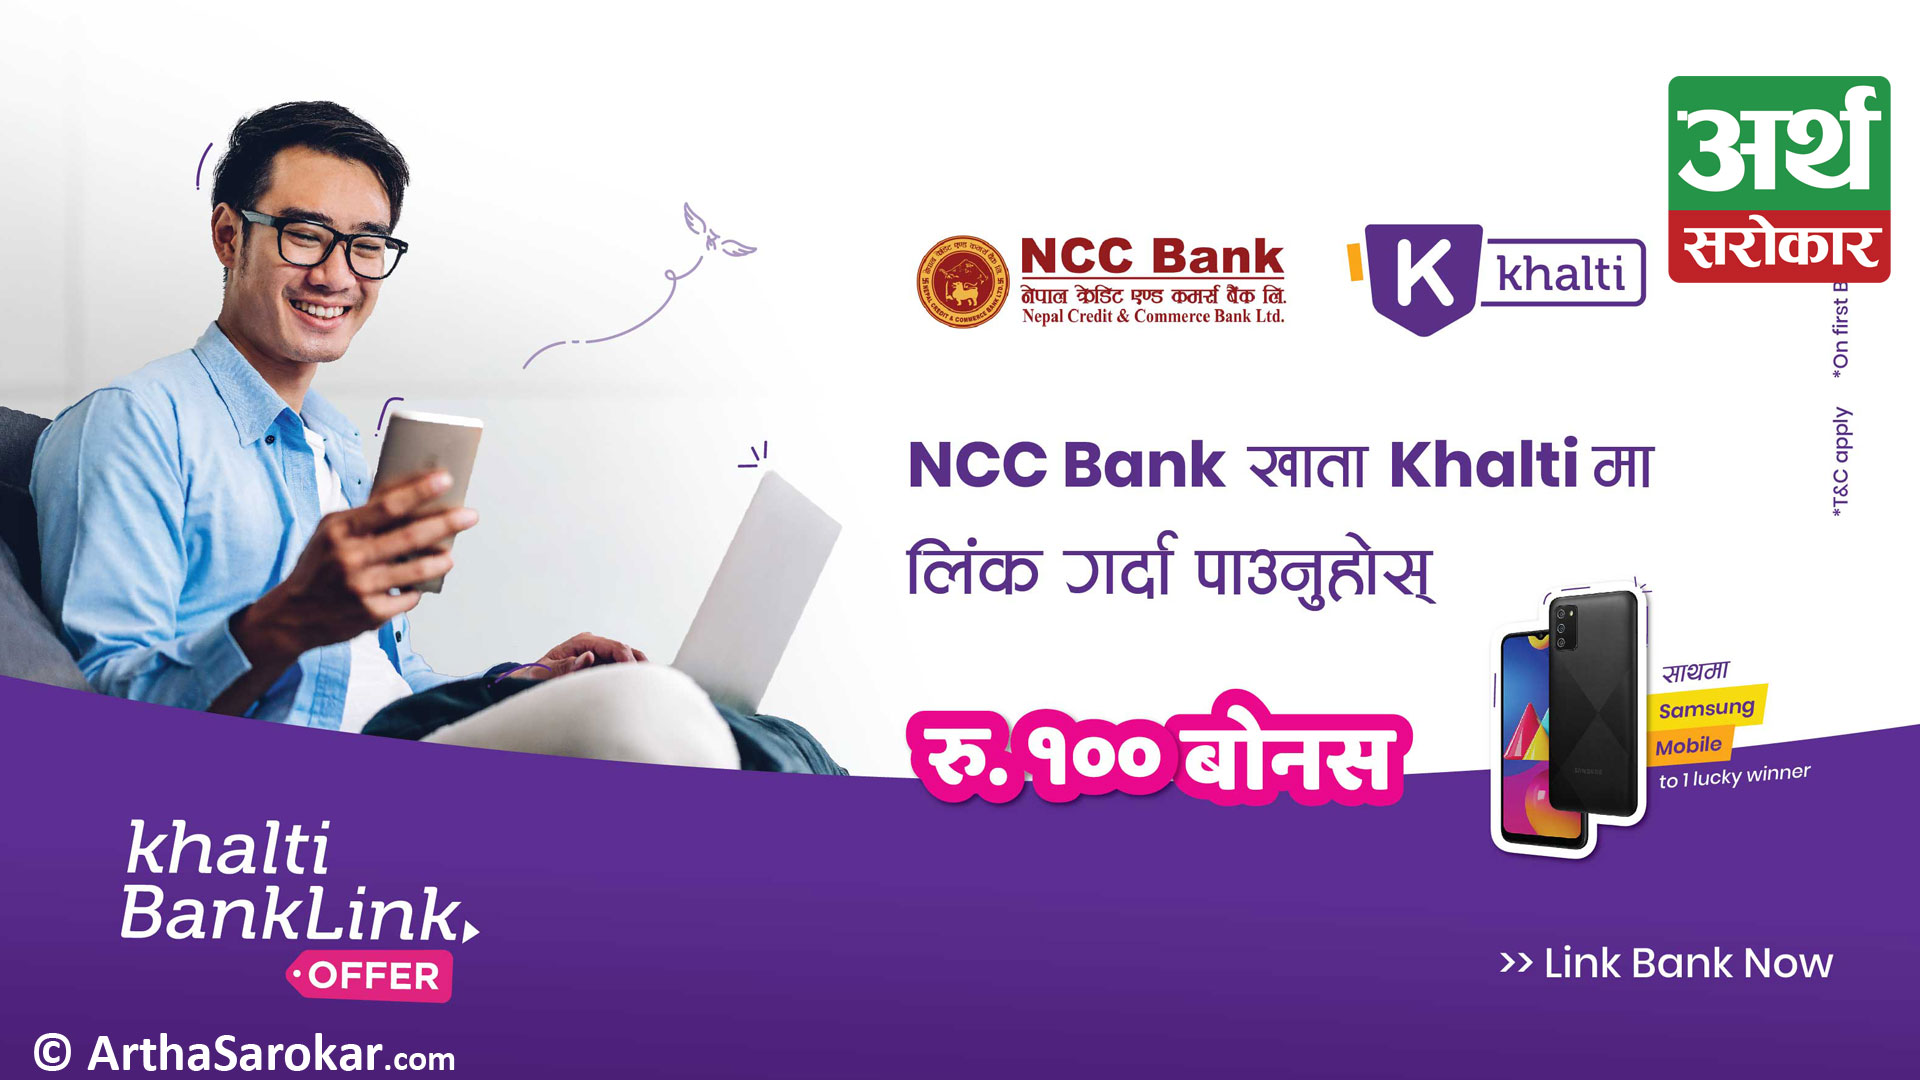 Khalti enabled NCC Bank Limited in Bank Link facility, users to get Rs. 100 Bonus and Smartphone